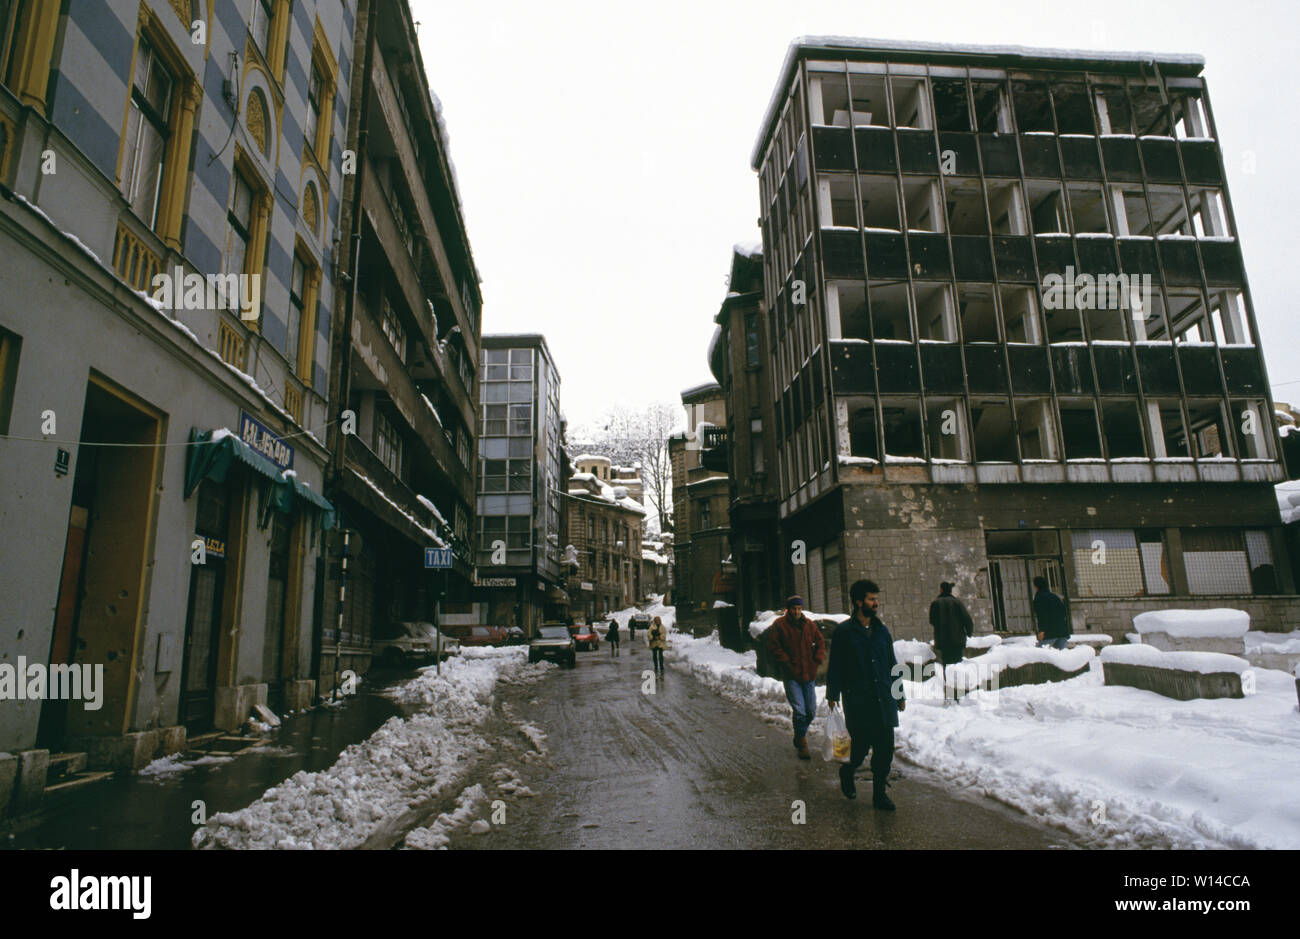 28th March 1993 During the Siege of Sarajevo: the view north along Vuka Karadzica (renamed Pehlivanuša after the war) - lots of shrapnel damage to all the buildings from Serbian mortar bombs. Stock Photo